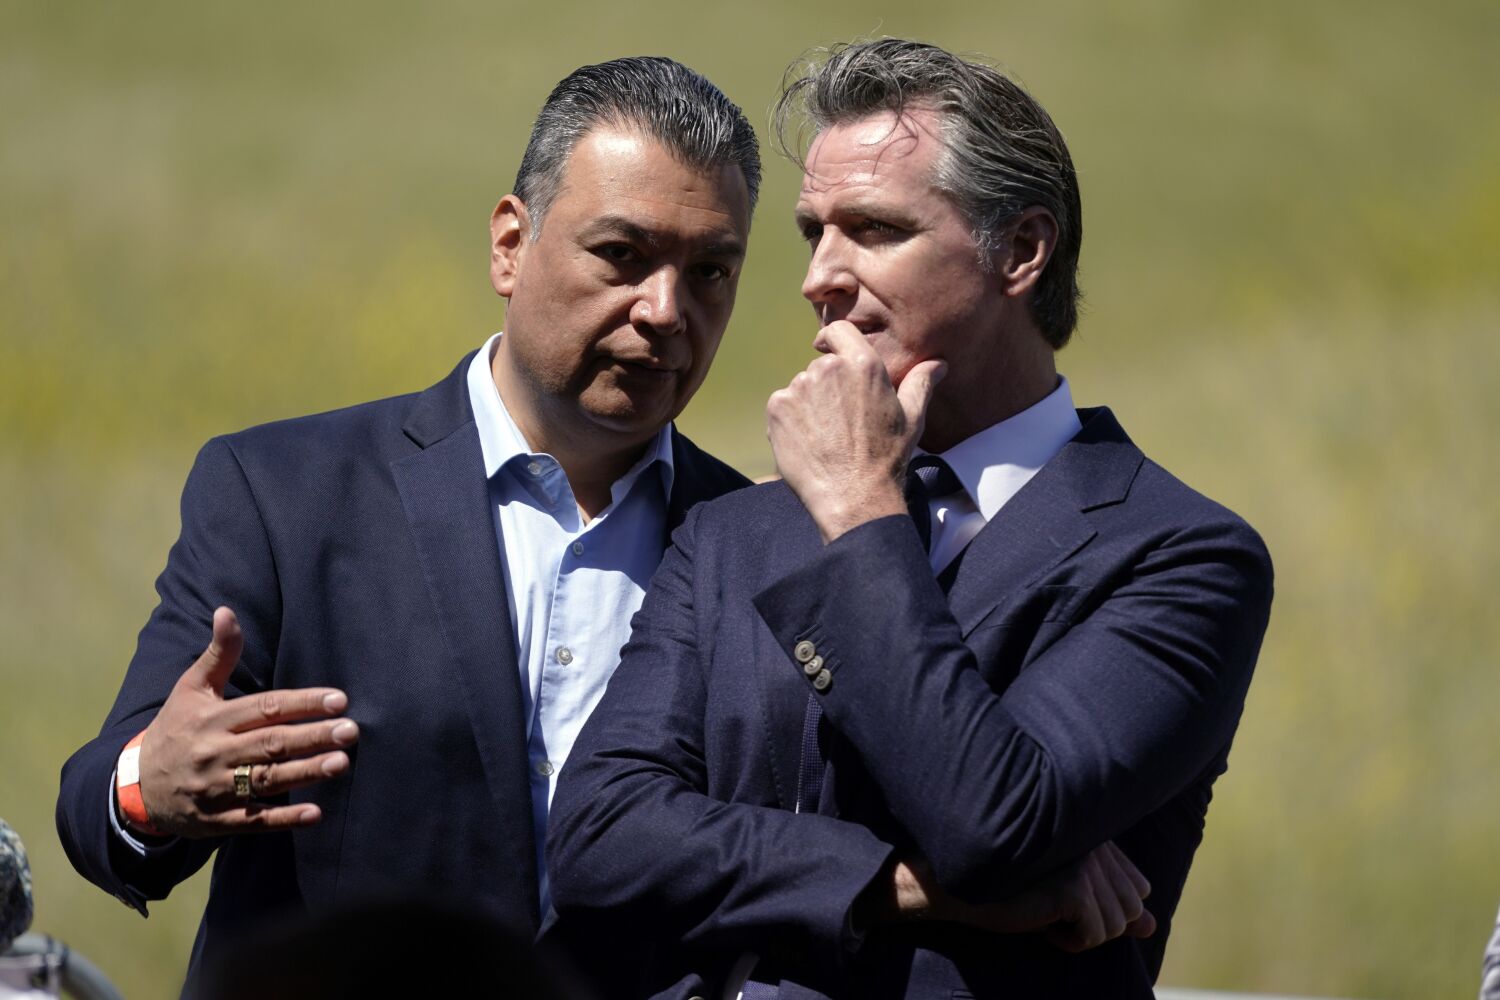 Newsom gets good marks in new poll but faces test with budget crisis 